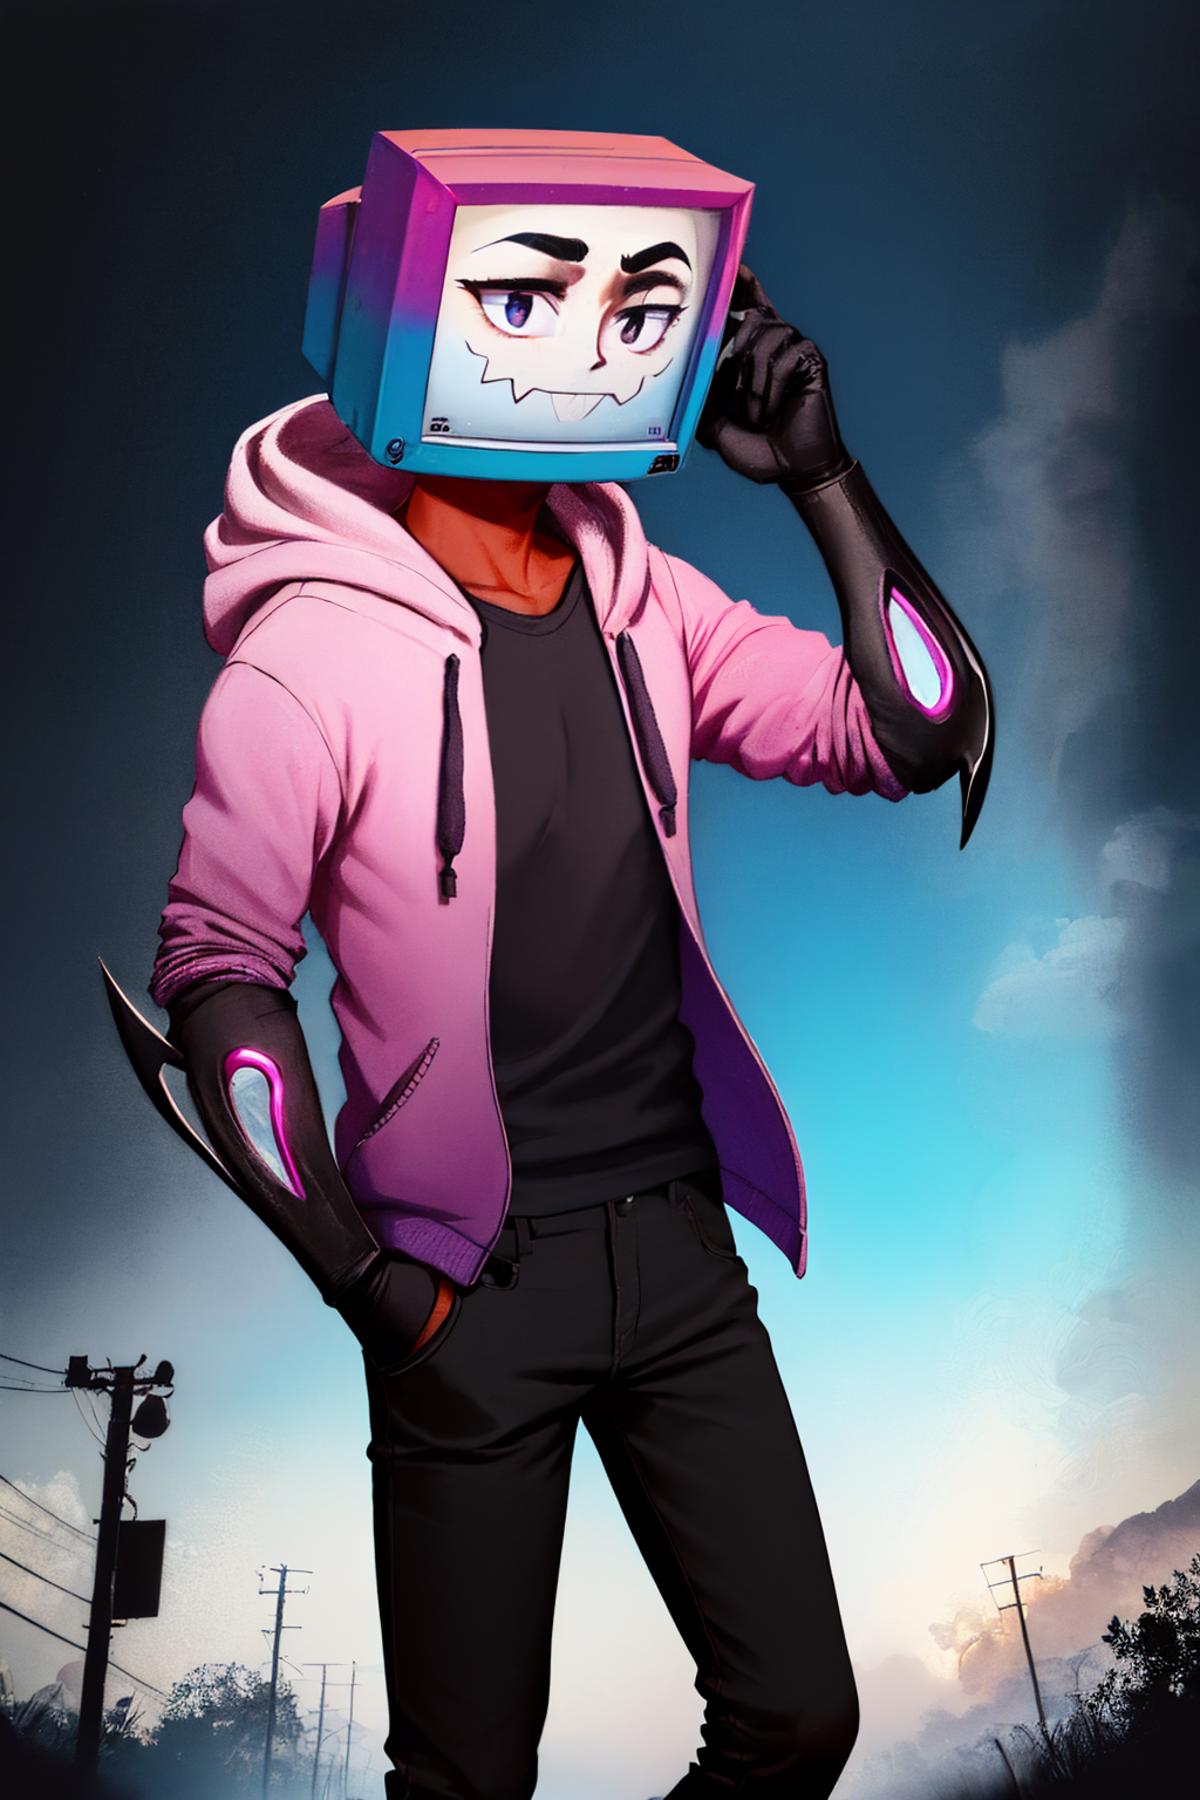 Pyrocynical | YouTuber image by justTNP